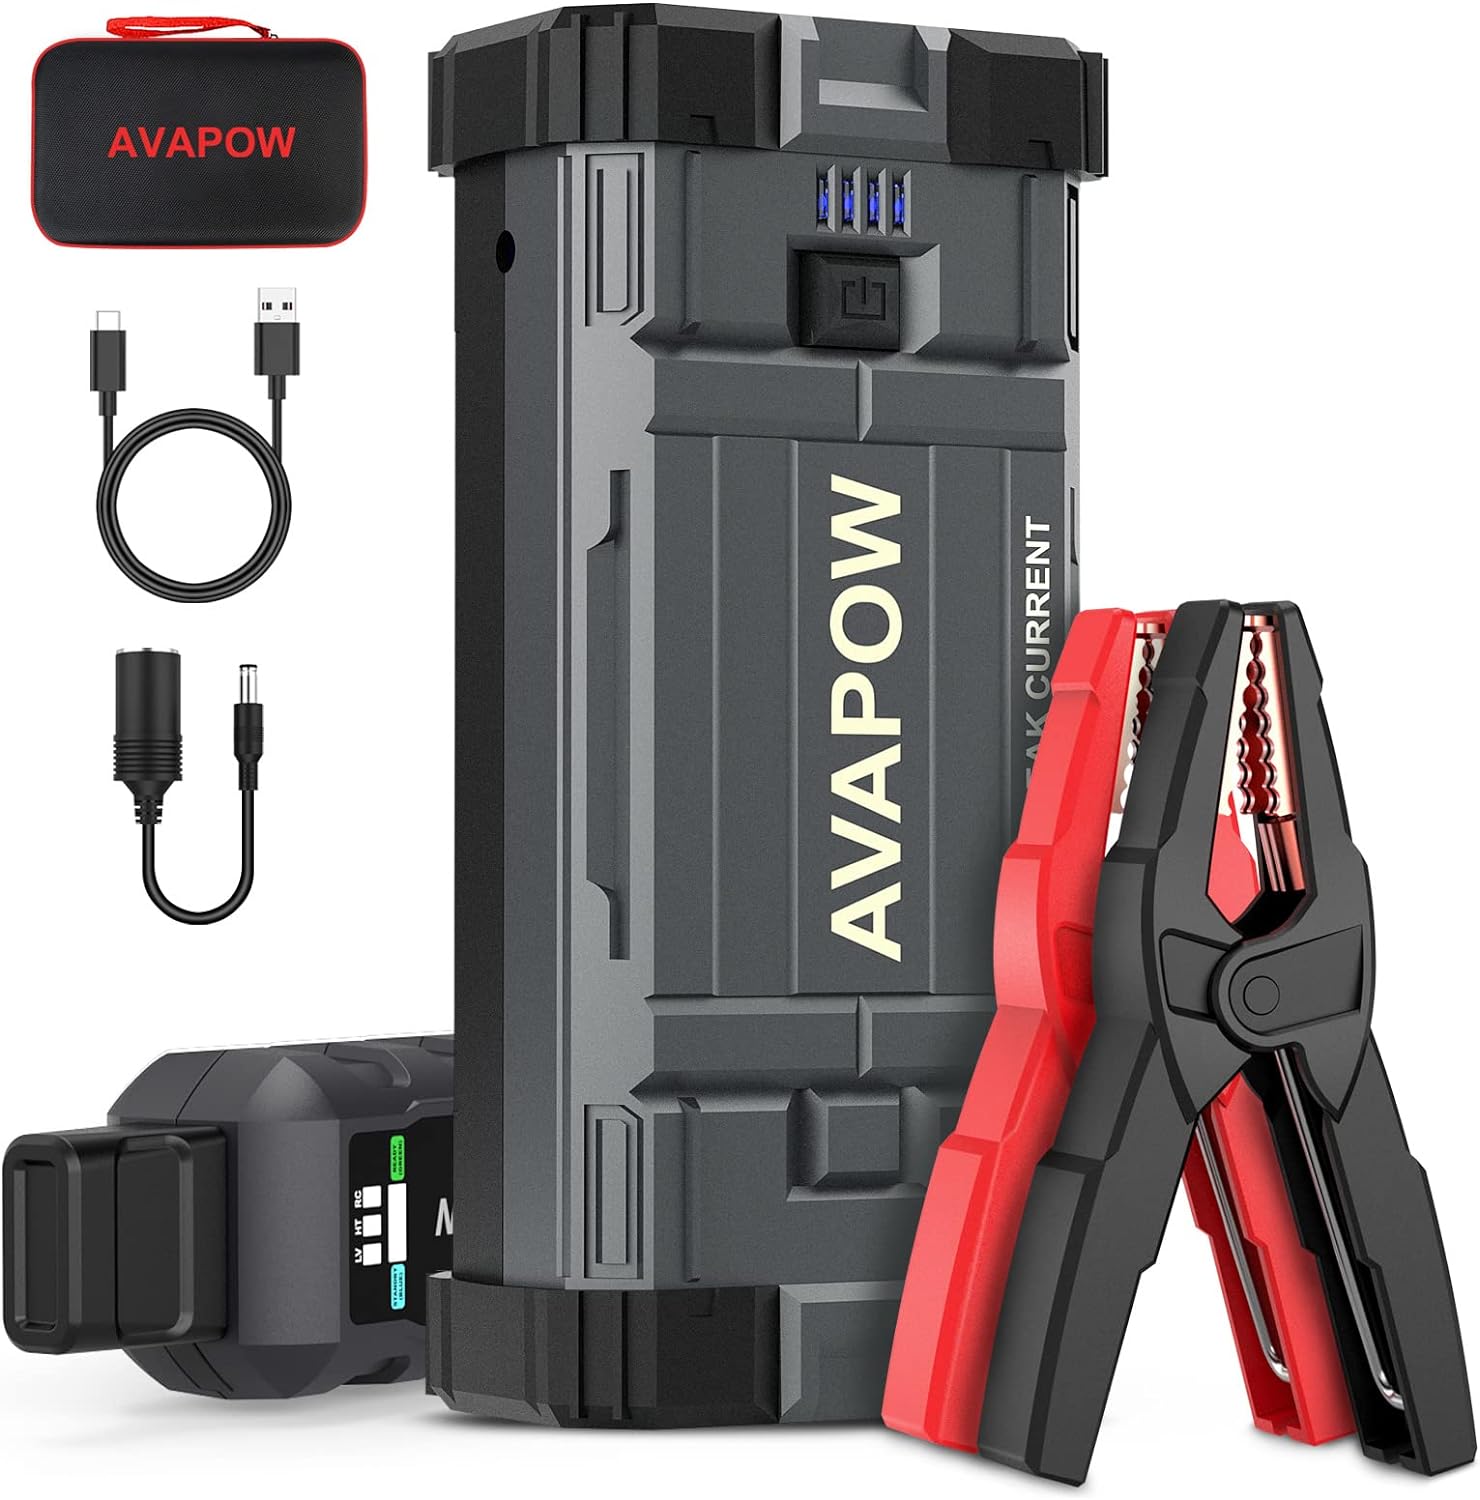 AVAPOW Car Jump Starter, 4000A Peak Battery (for All Gas or Up to 10L  Diesel), Portable Booster Power Pack, 12V Auto Jump Box with LED Light, USB